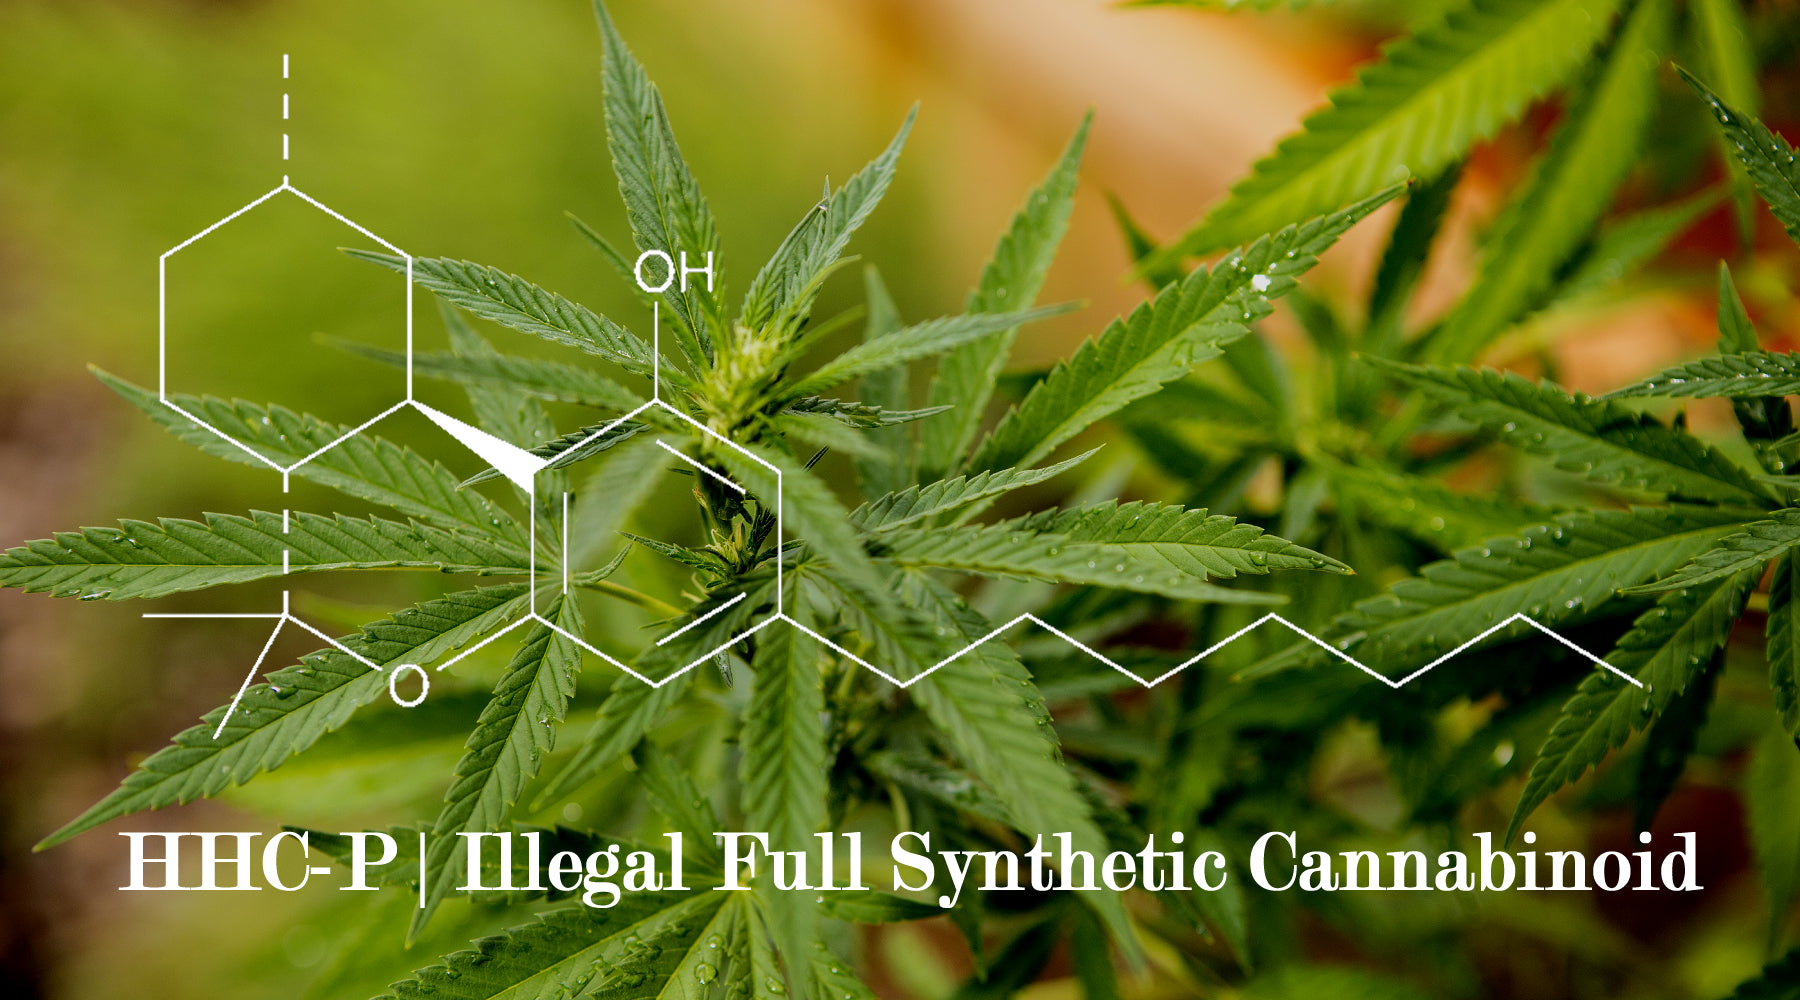 HHC-P An Illegal Fully Synthetic Cannabinoid